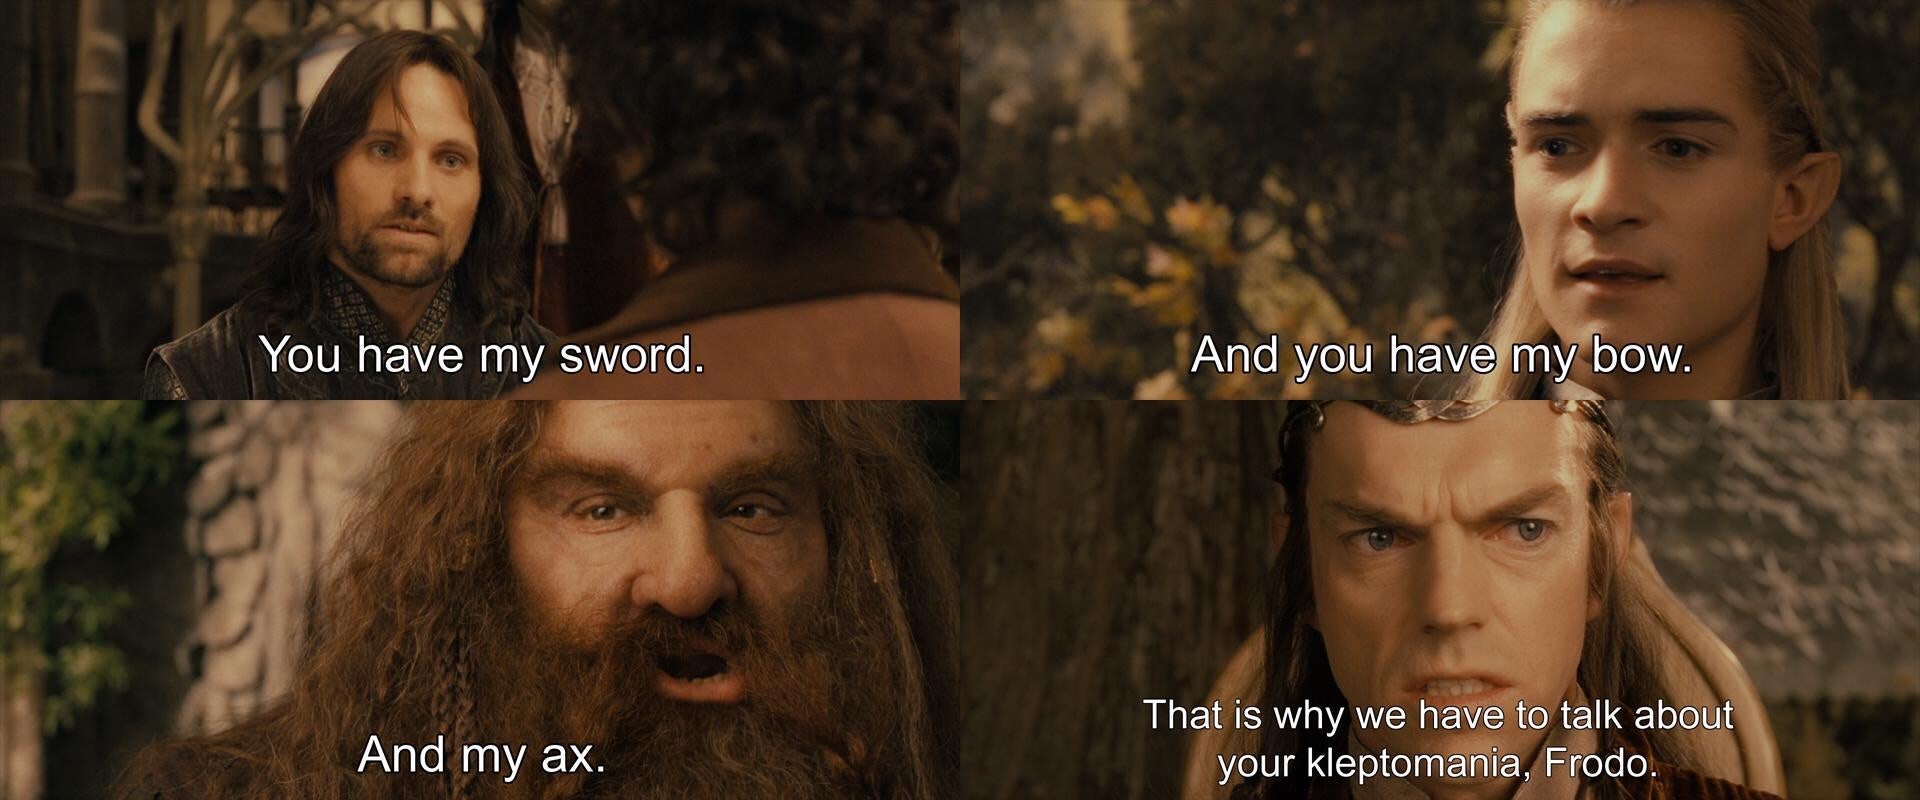 lotr memes - You have my sword. And you have my bow. And my ax. That is why we have to talk about your kleptomania, Frodo.